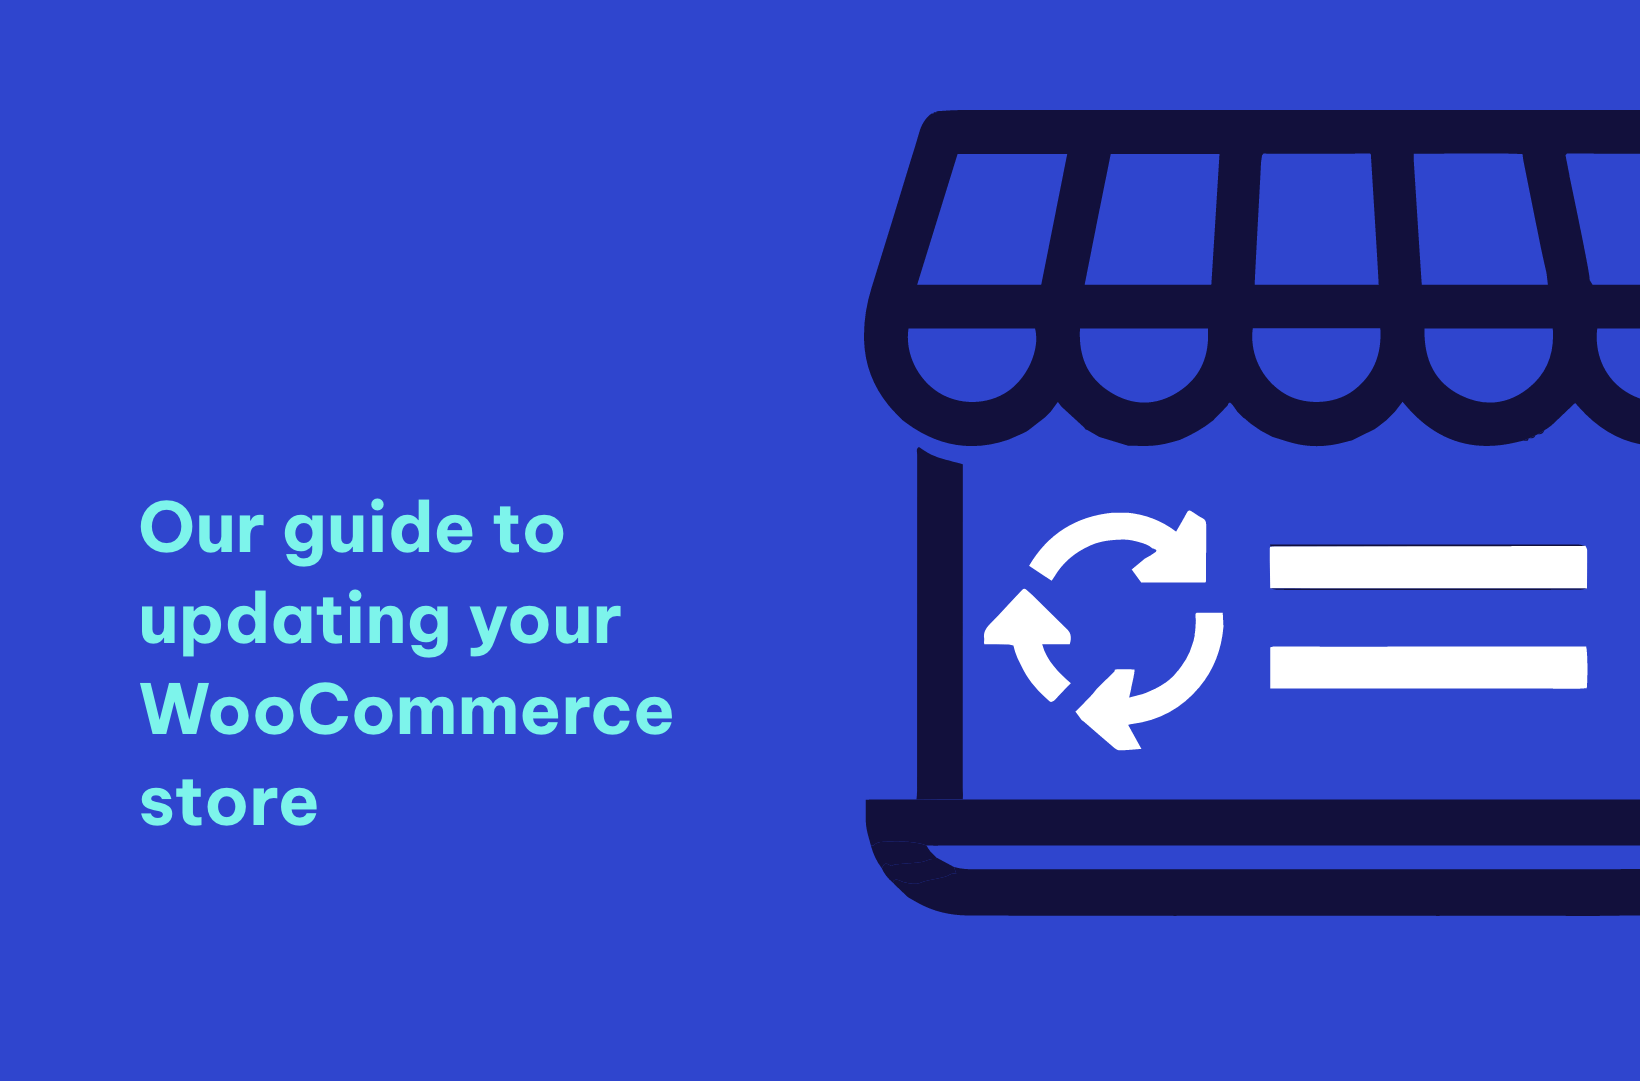 Our guide to updating your WooCommerce store